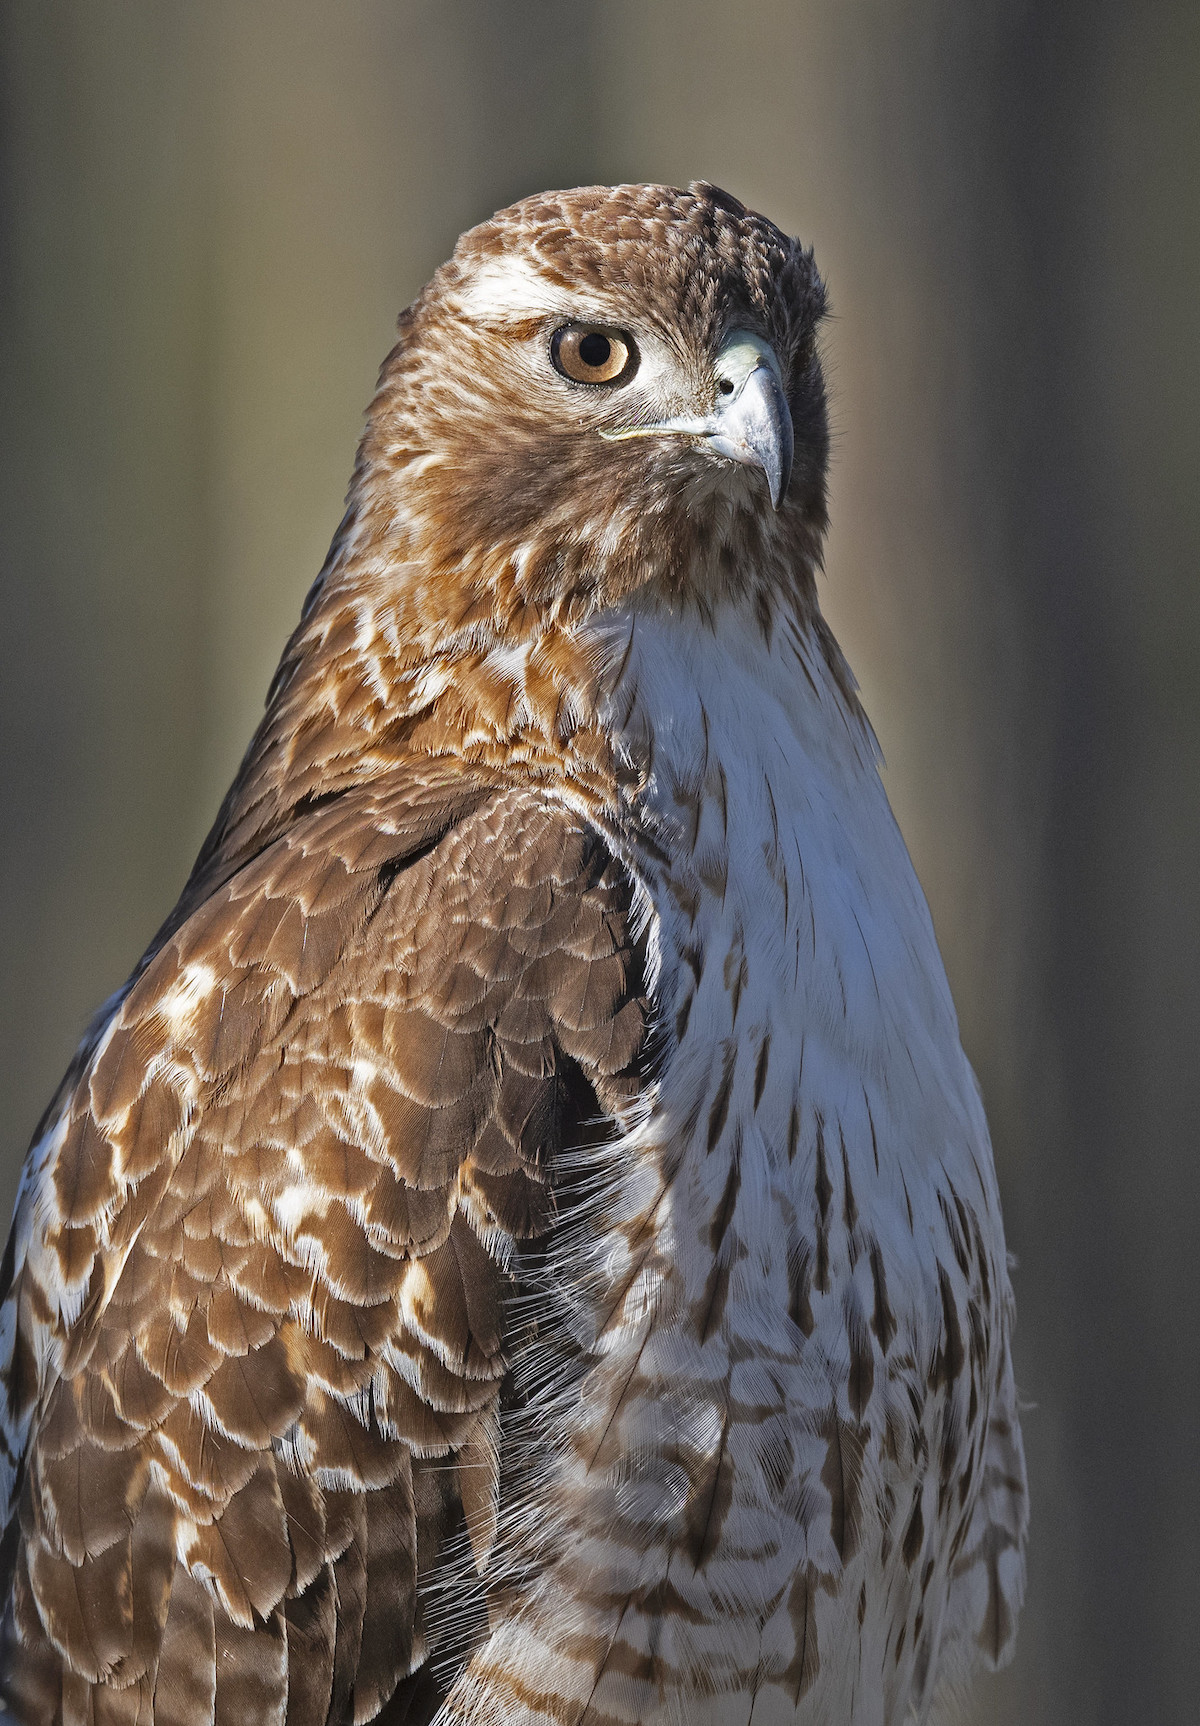 A close-up shot of a red-tailed hawk in upstate New York